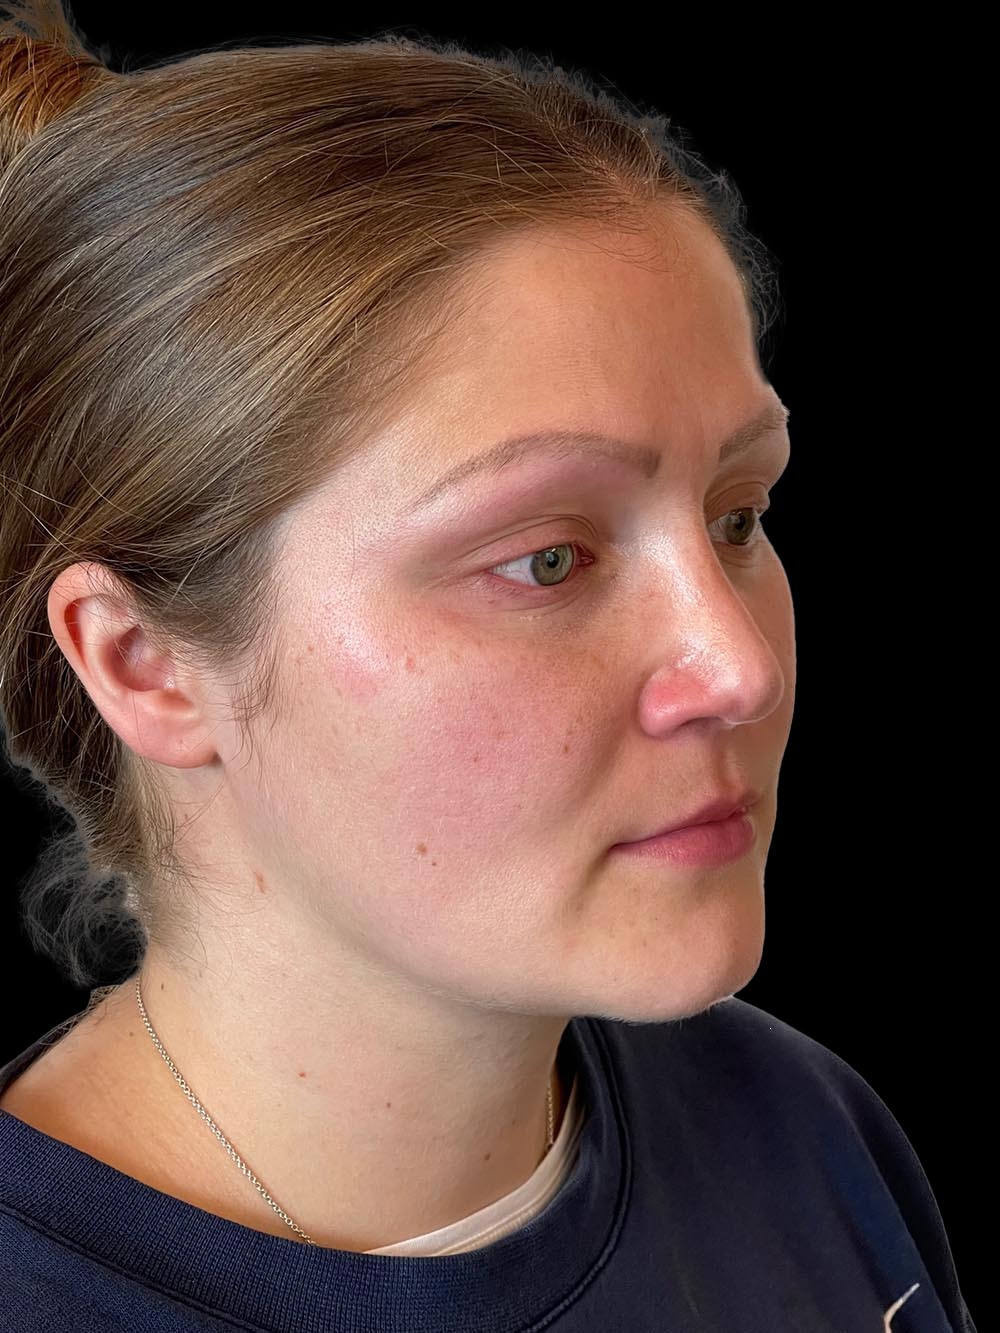 Photo of the patient’s face after the Rhinoplasty surgery. Patient 6 - Set 4